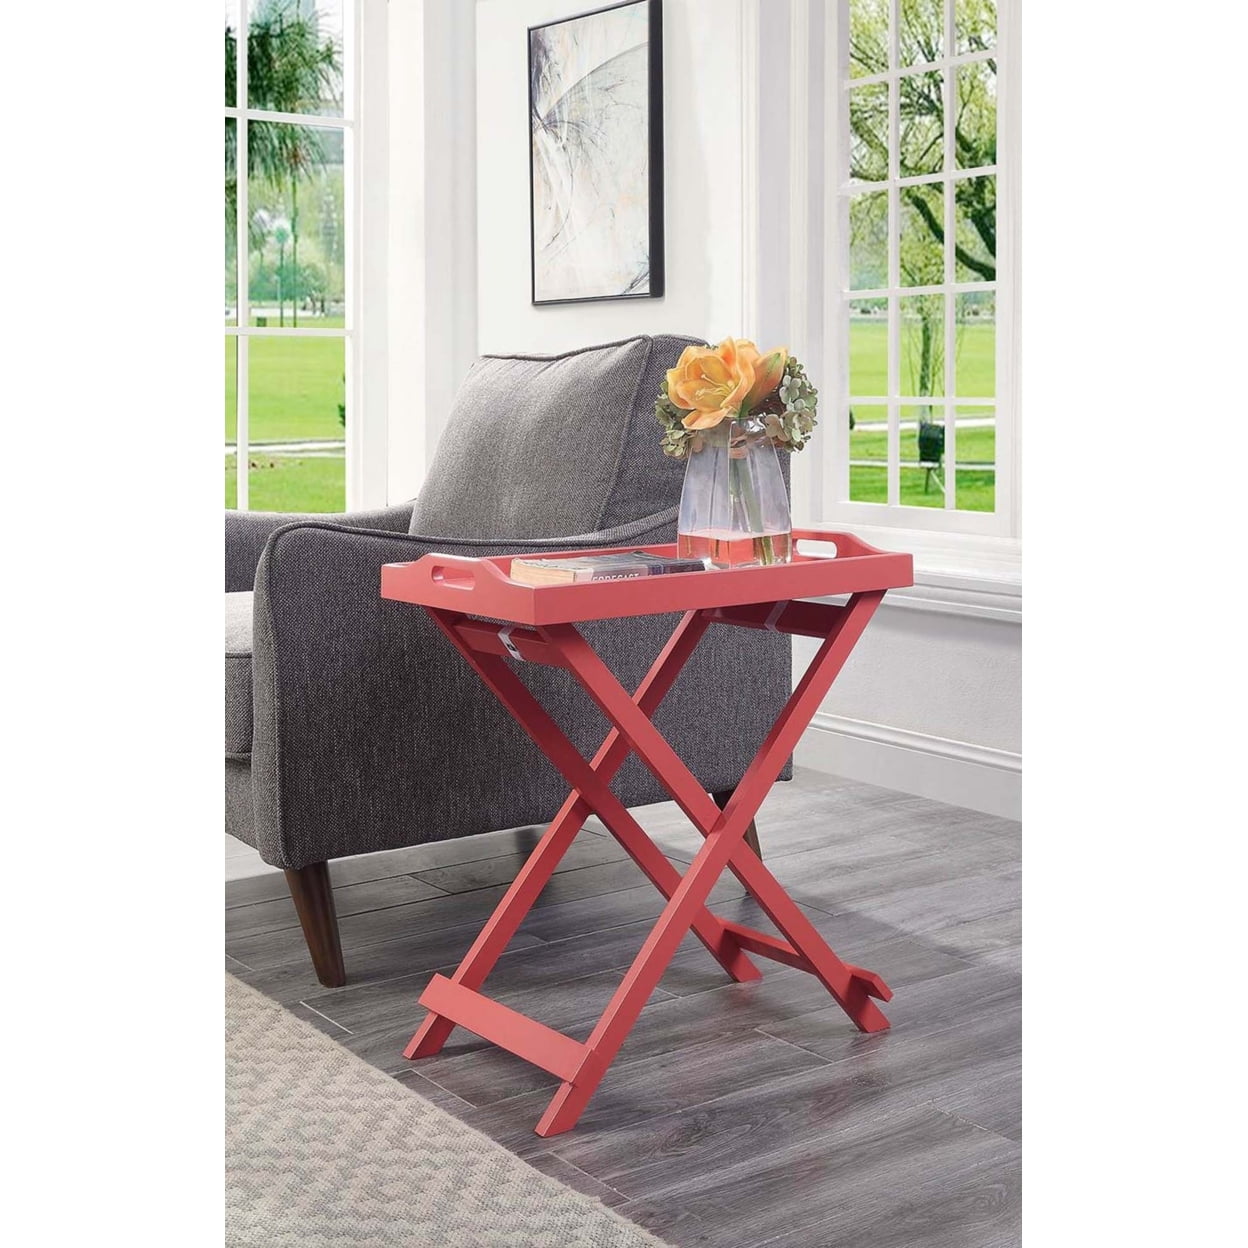 Picture of Convenience Concepts 239900CA Designs2Go Tray Table, Coral